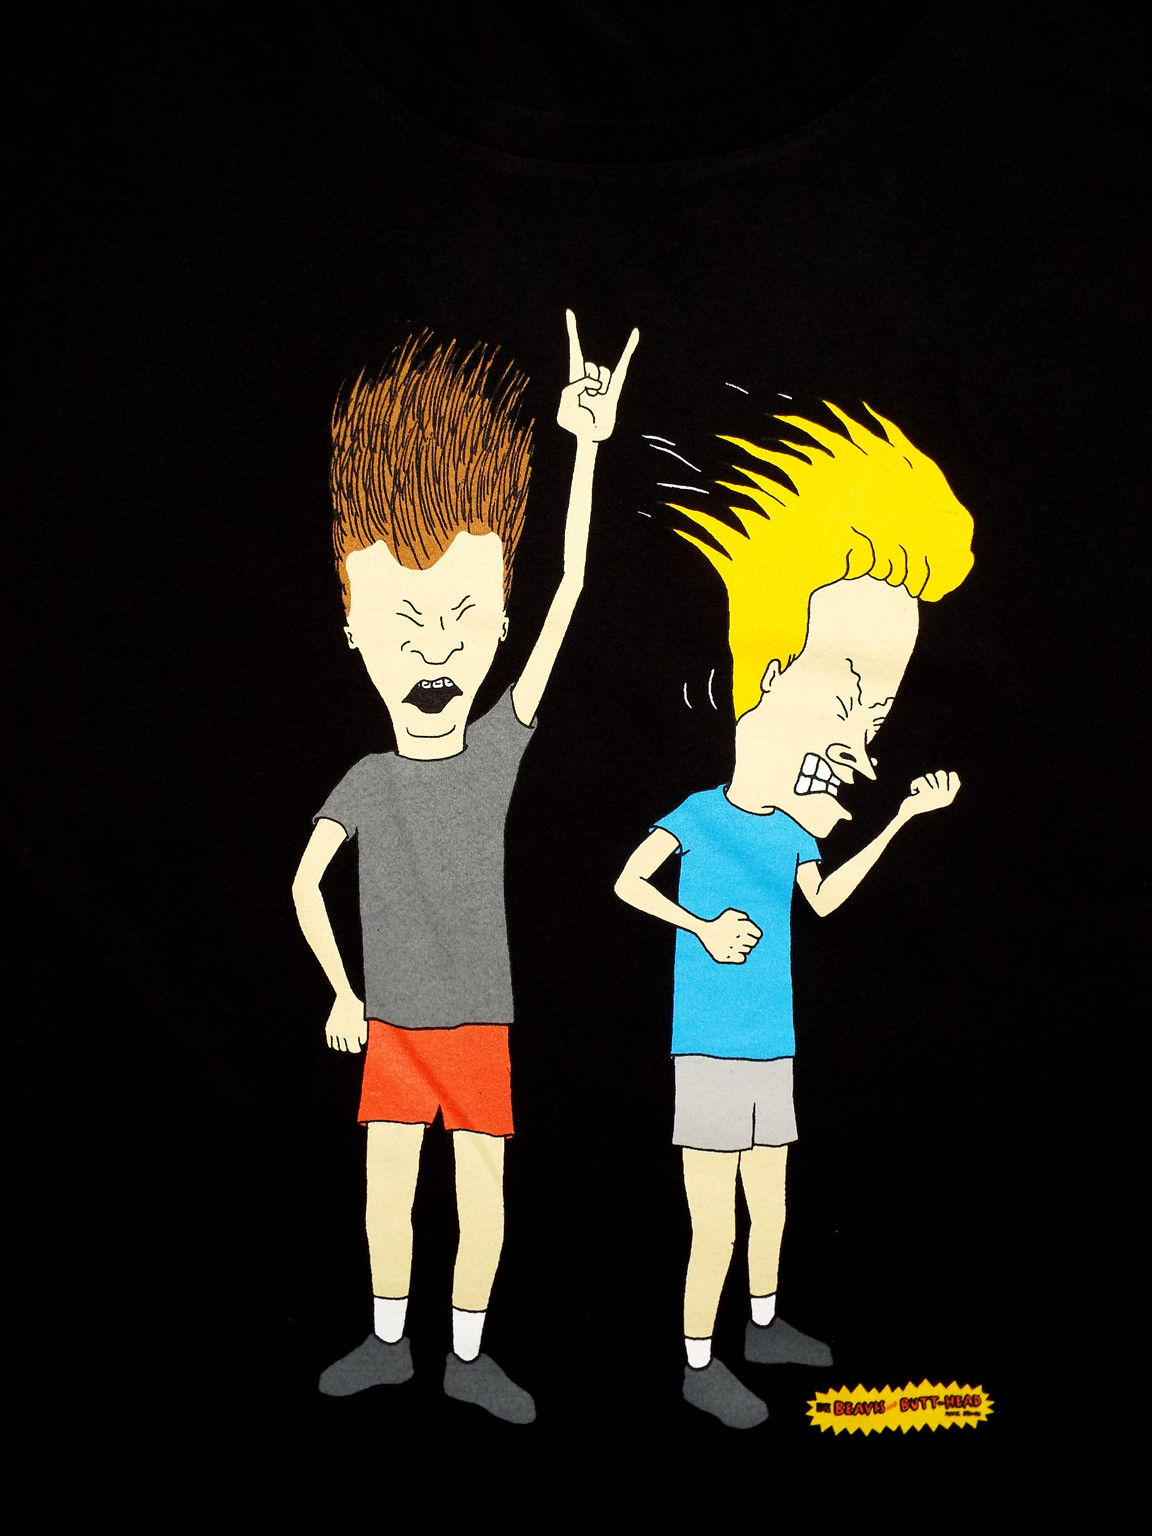 Beavis And Butt Head Cartoon Wallpaper Image In Collection